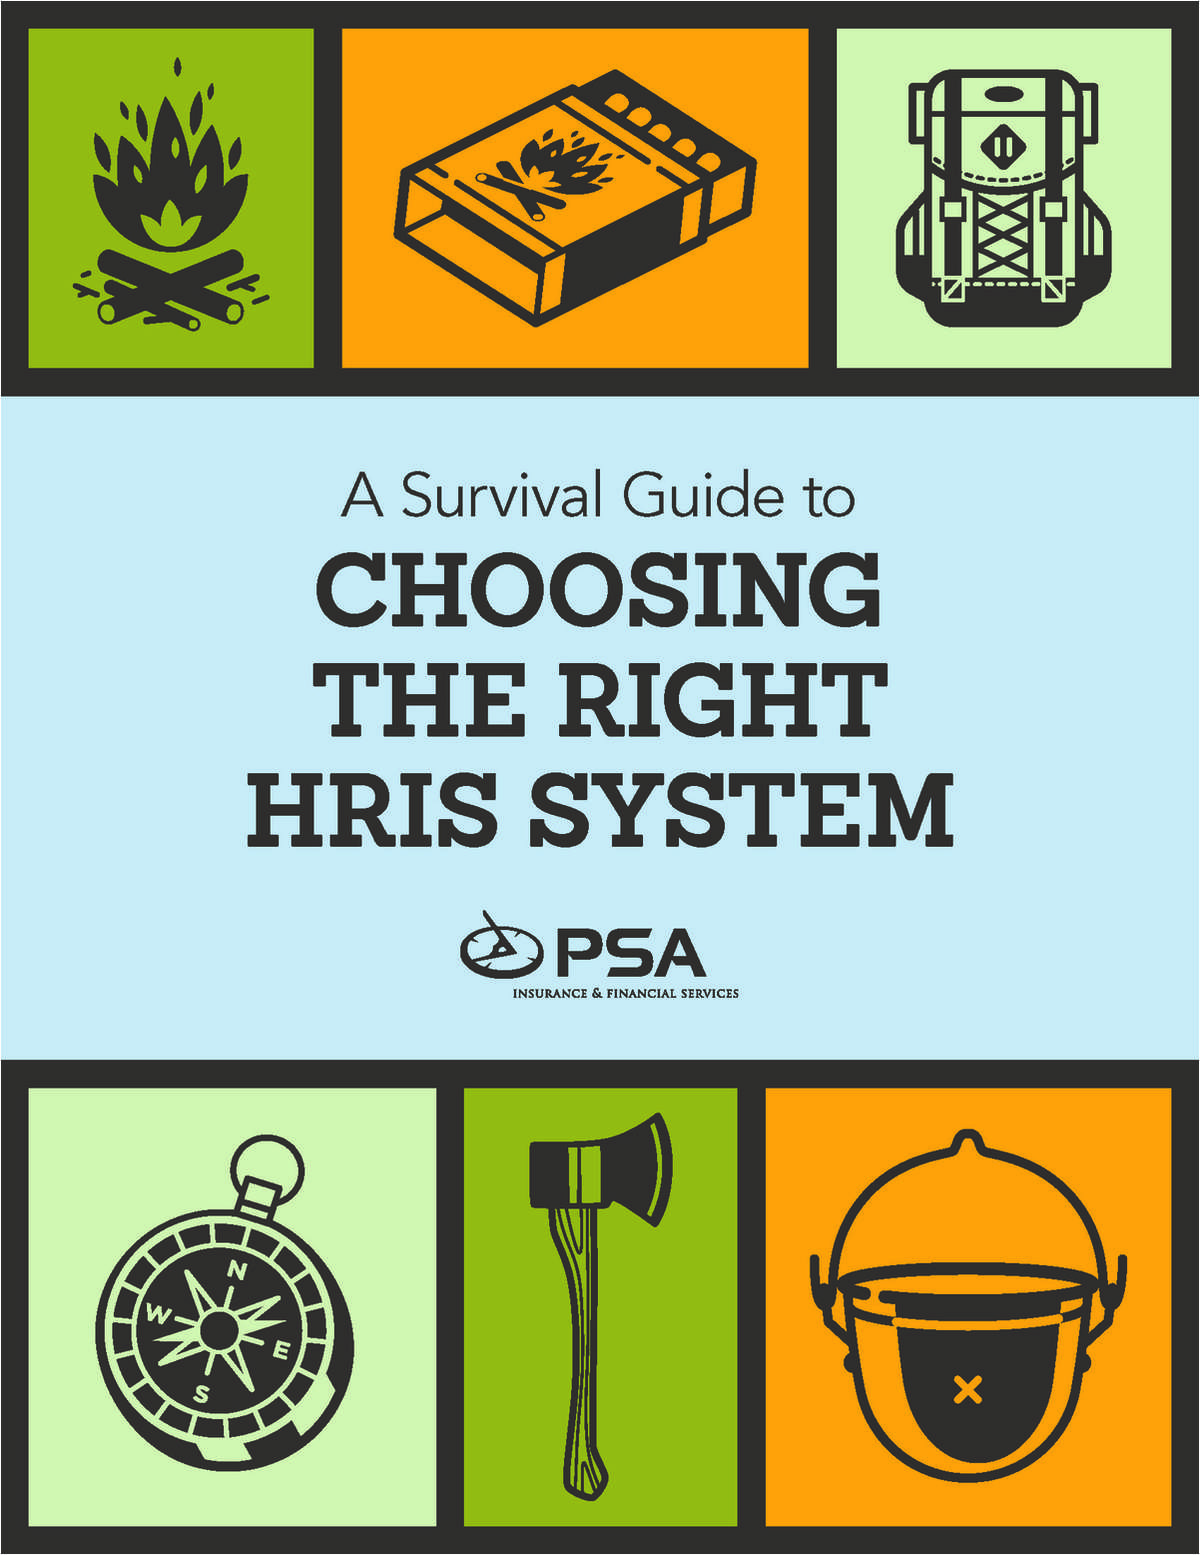 A Survival Guide to Choosing the Right HRIS System